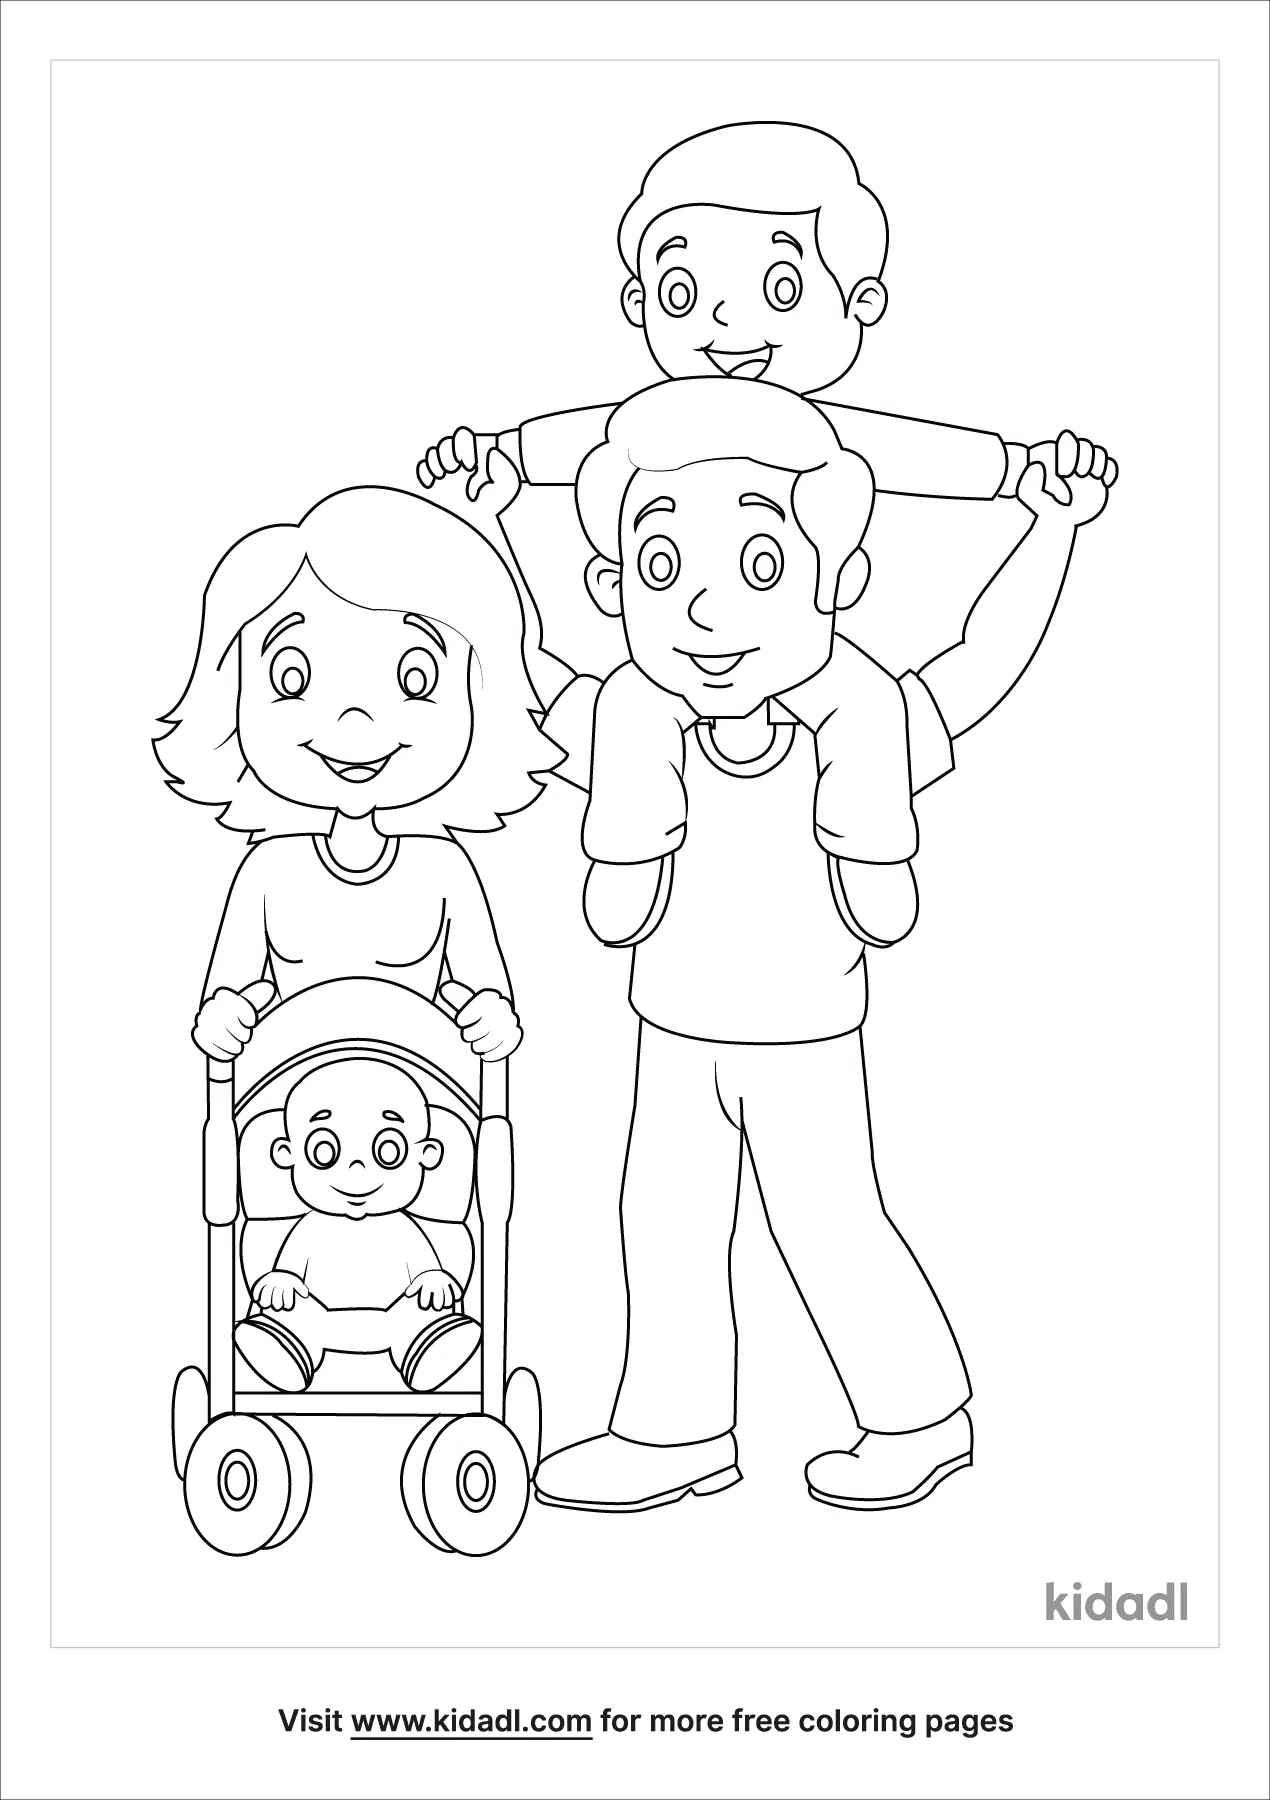 Free Cartoon Family Coloring Page | Coloring Page Printables | Kidadl